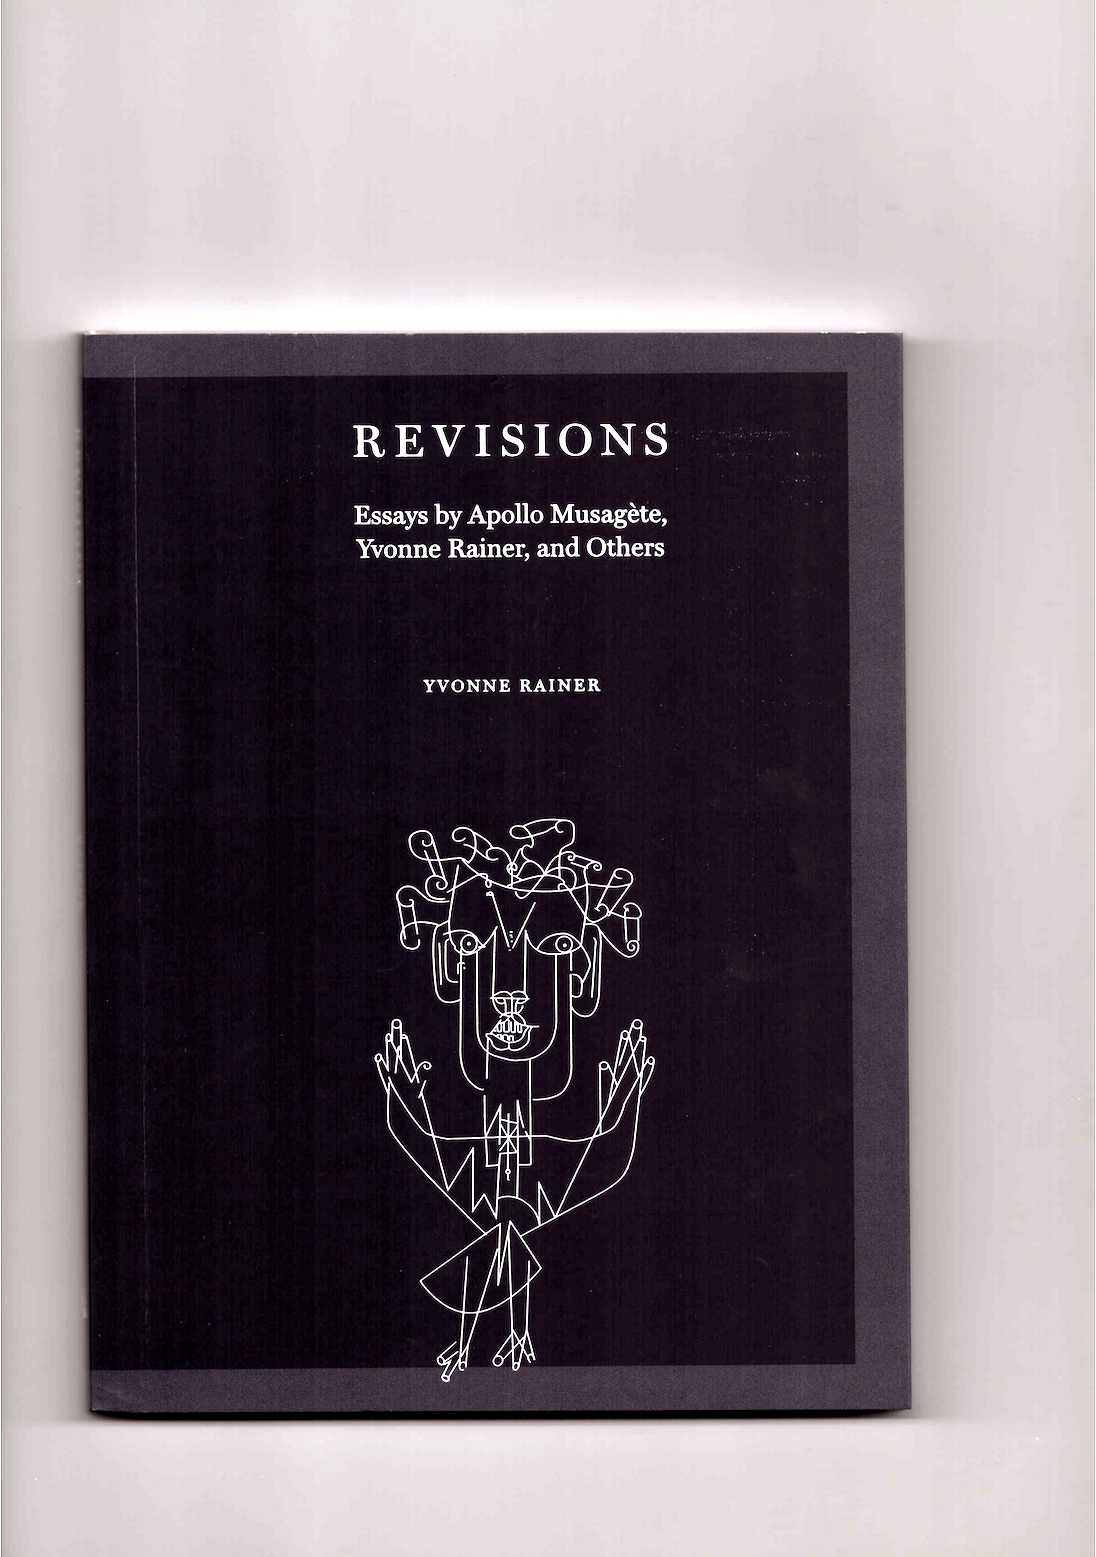 RAINER, Yvonne: CHURNER, Rachel (ed.) - Revisions: Essays by Apollo Musagète, Yvonne Rainer, and Others